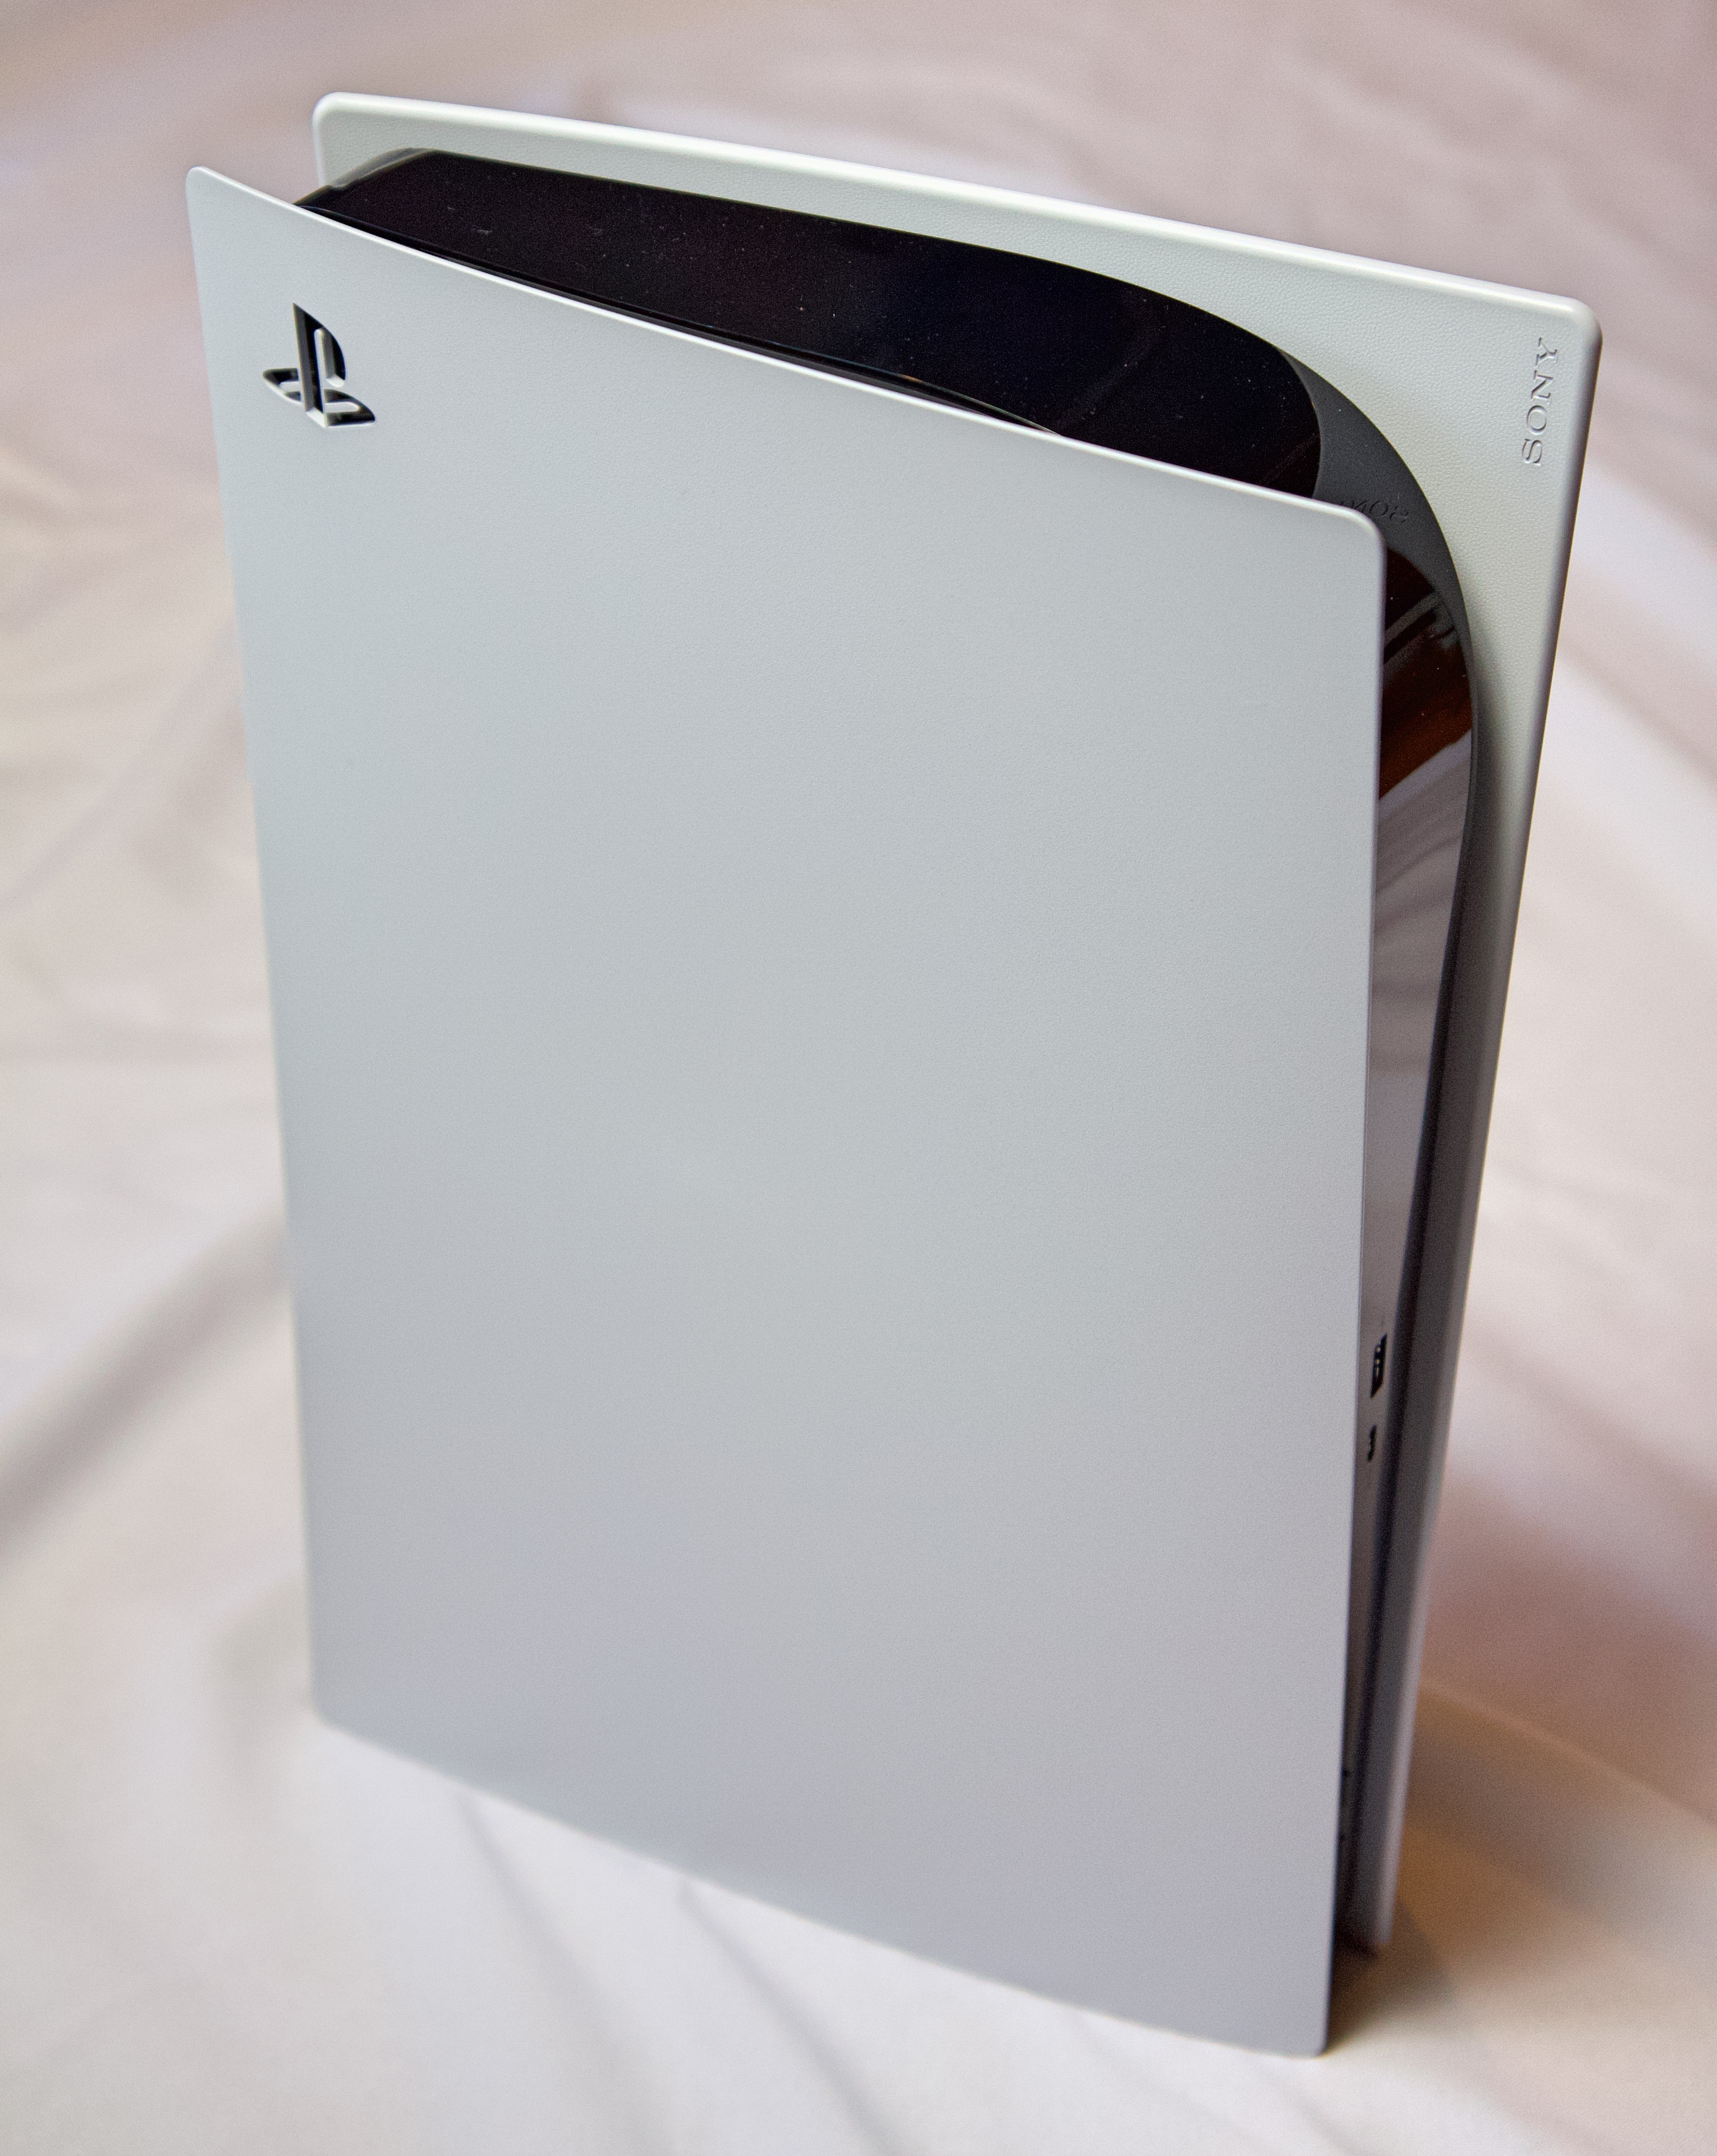 Sony PlayStation 5 review: A powerful, more stylish console